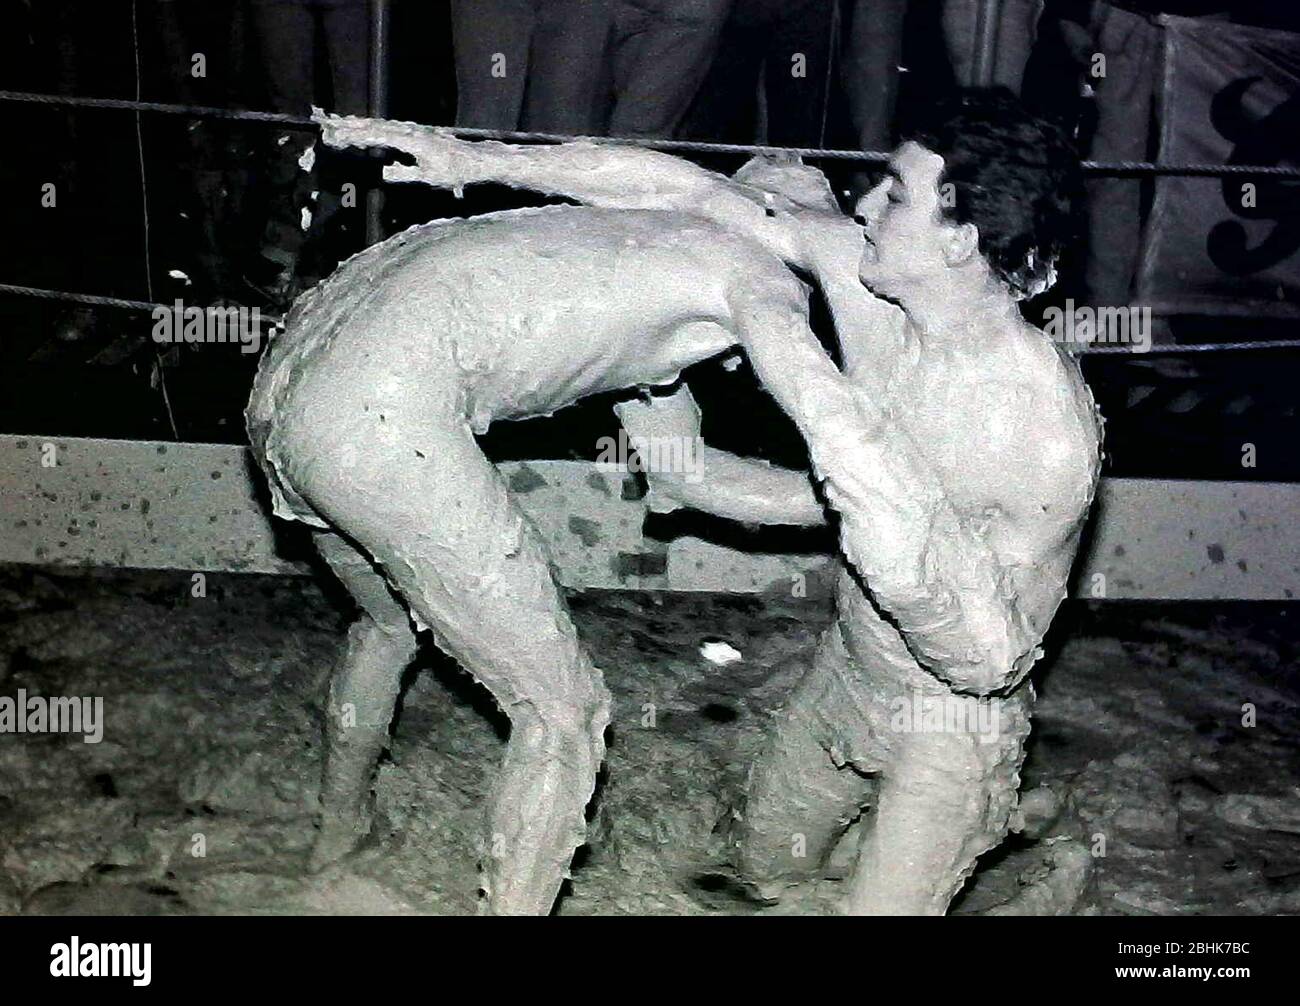 Two young men mud wrestling in Heros club in Manchester, England, United Kingdom, a popular club for gay male customers, in 1984. Daily life in the night life of Manchester's gay clubs and bars in the 1980's. Stock Photo